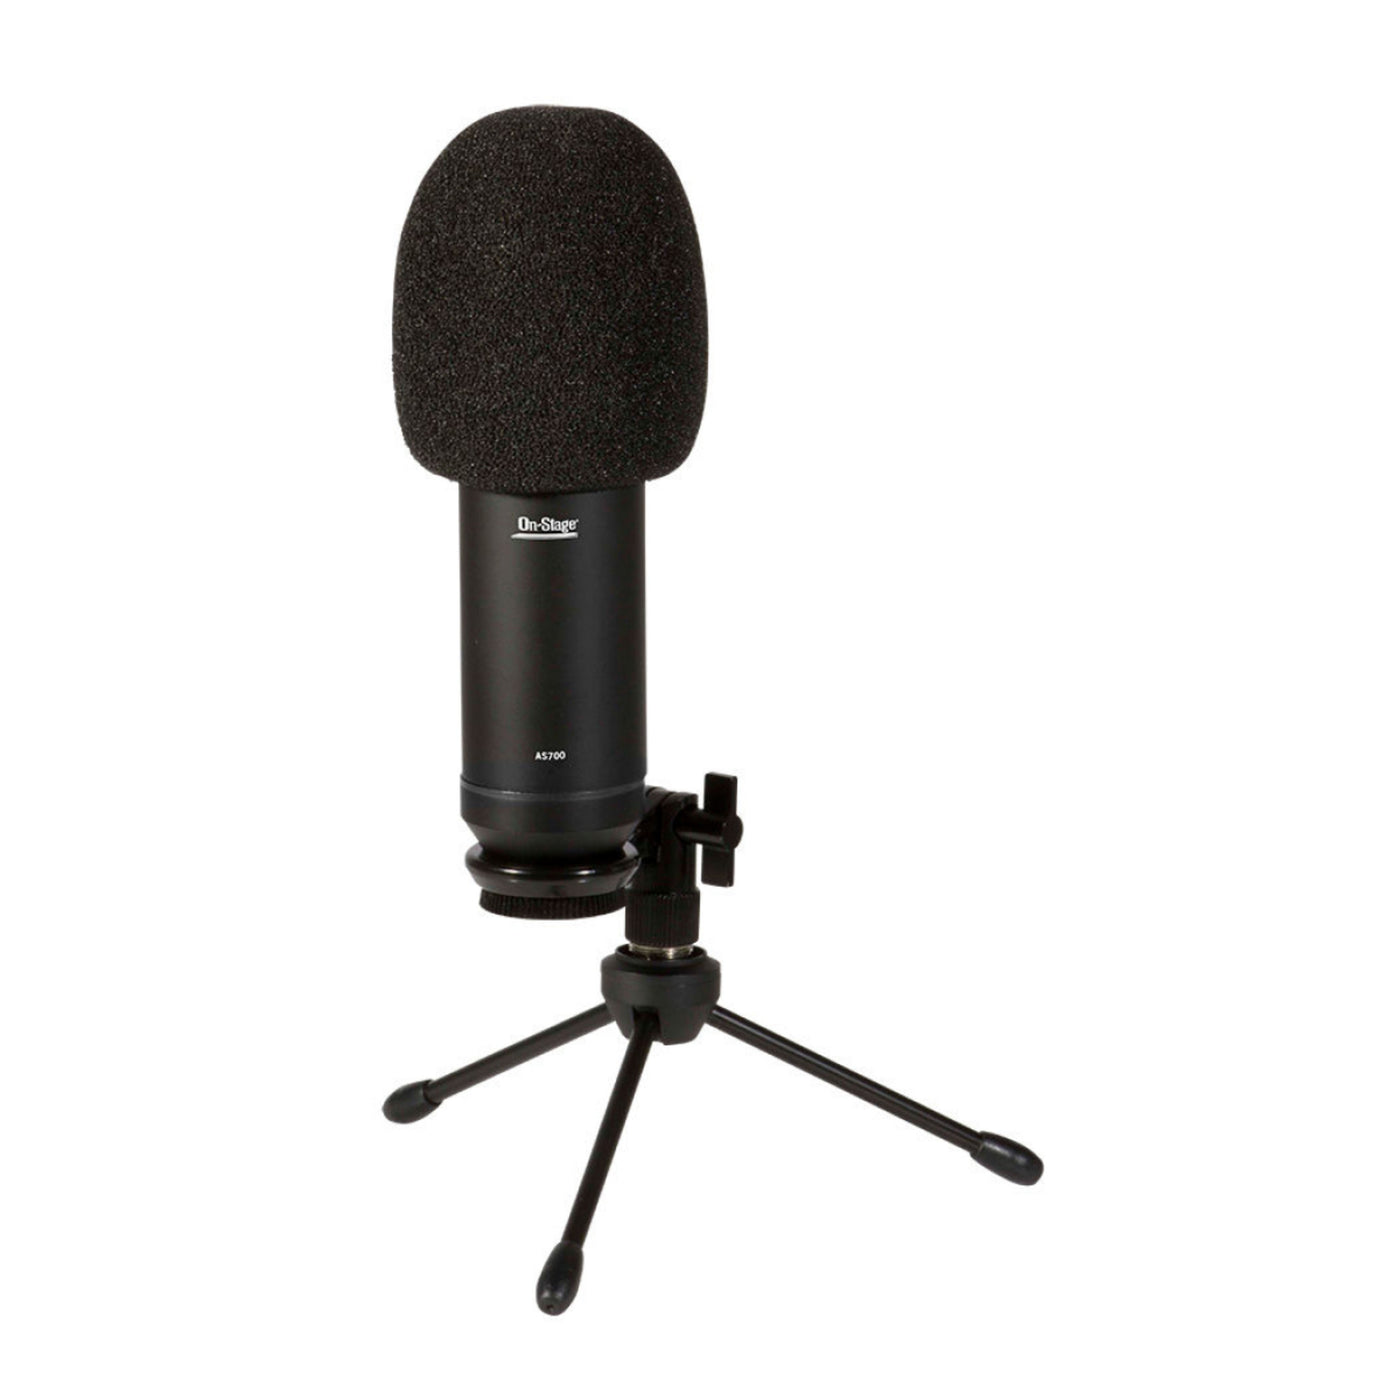 On-Stage Stands AS700 USB Powered Microphone with USB Cable, Mini Tripod Microphone Stand, Swiveling Microphone Clip, and Foam Windscreen